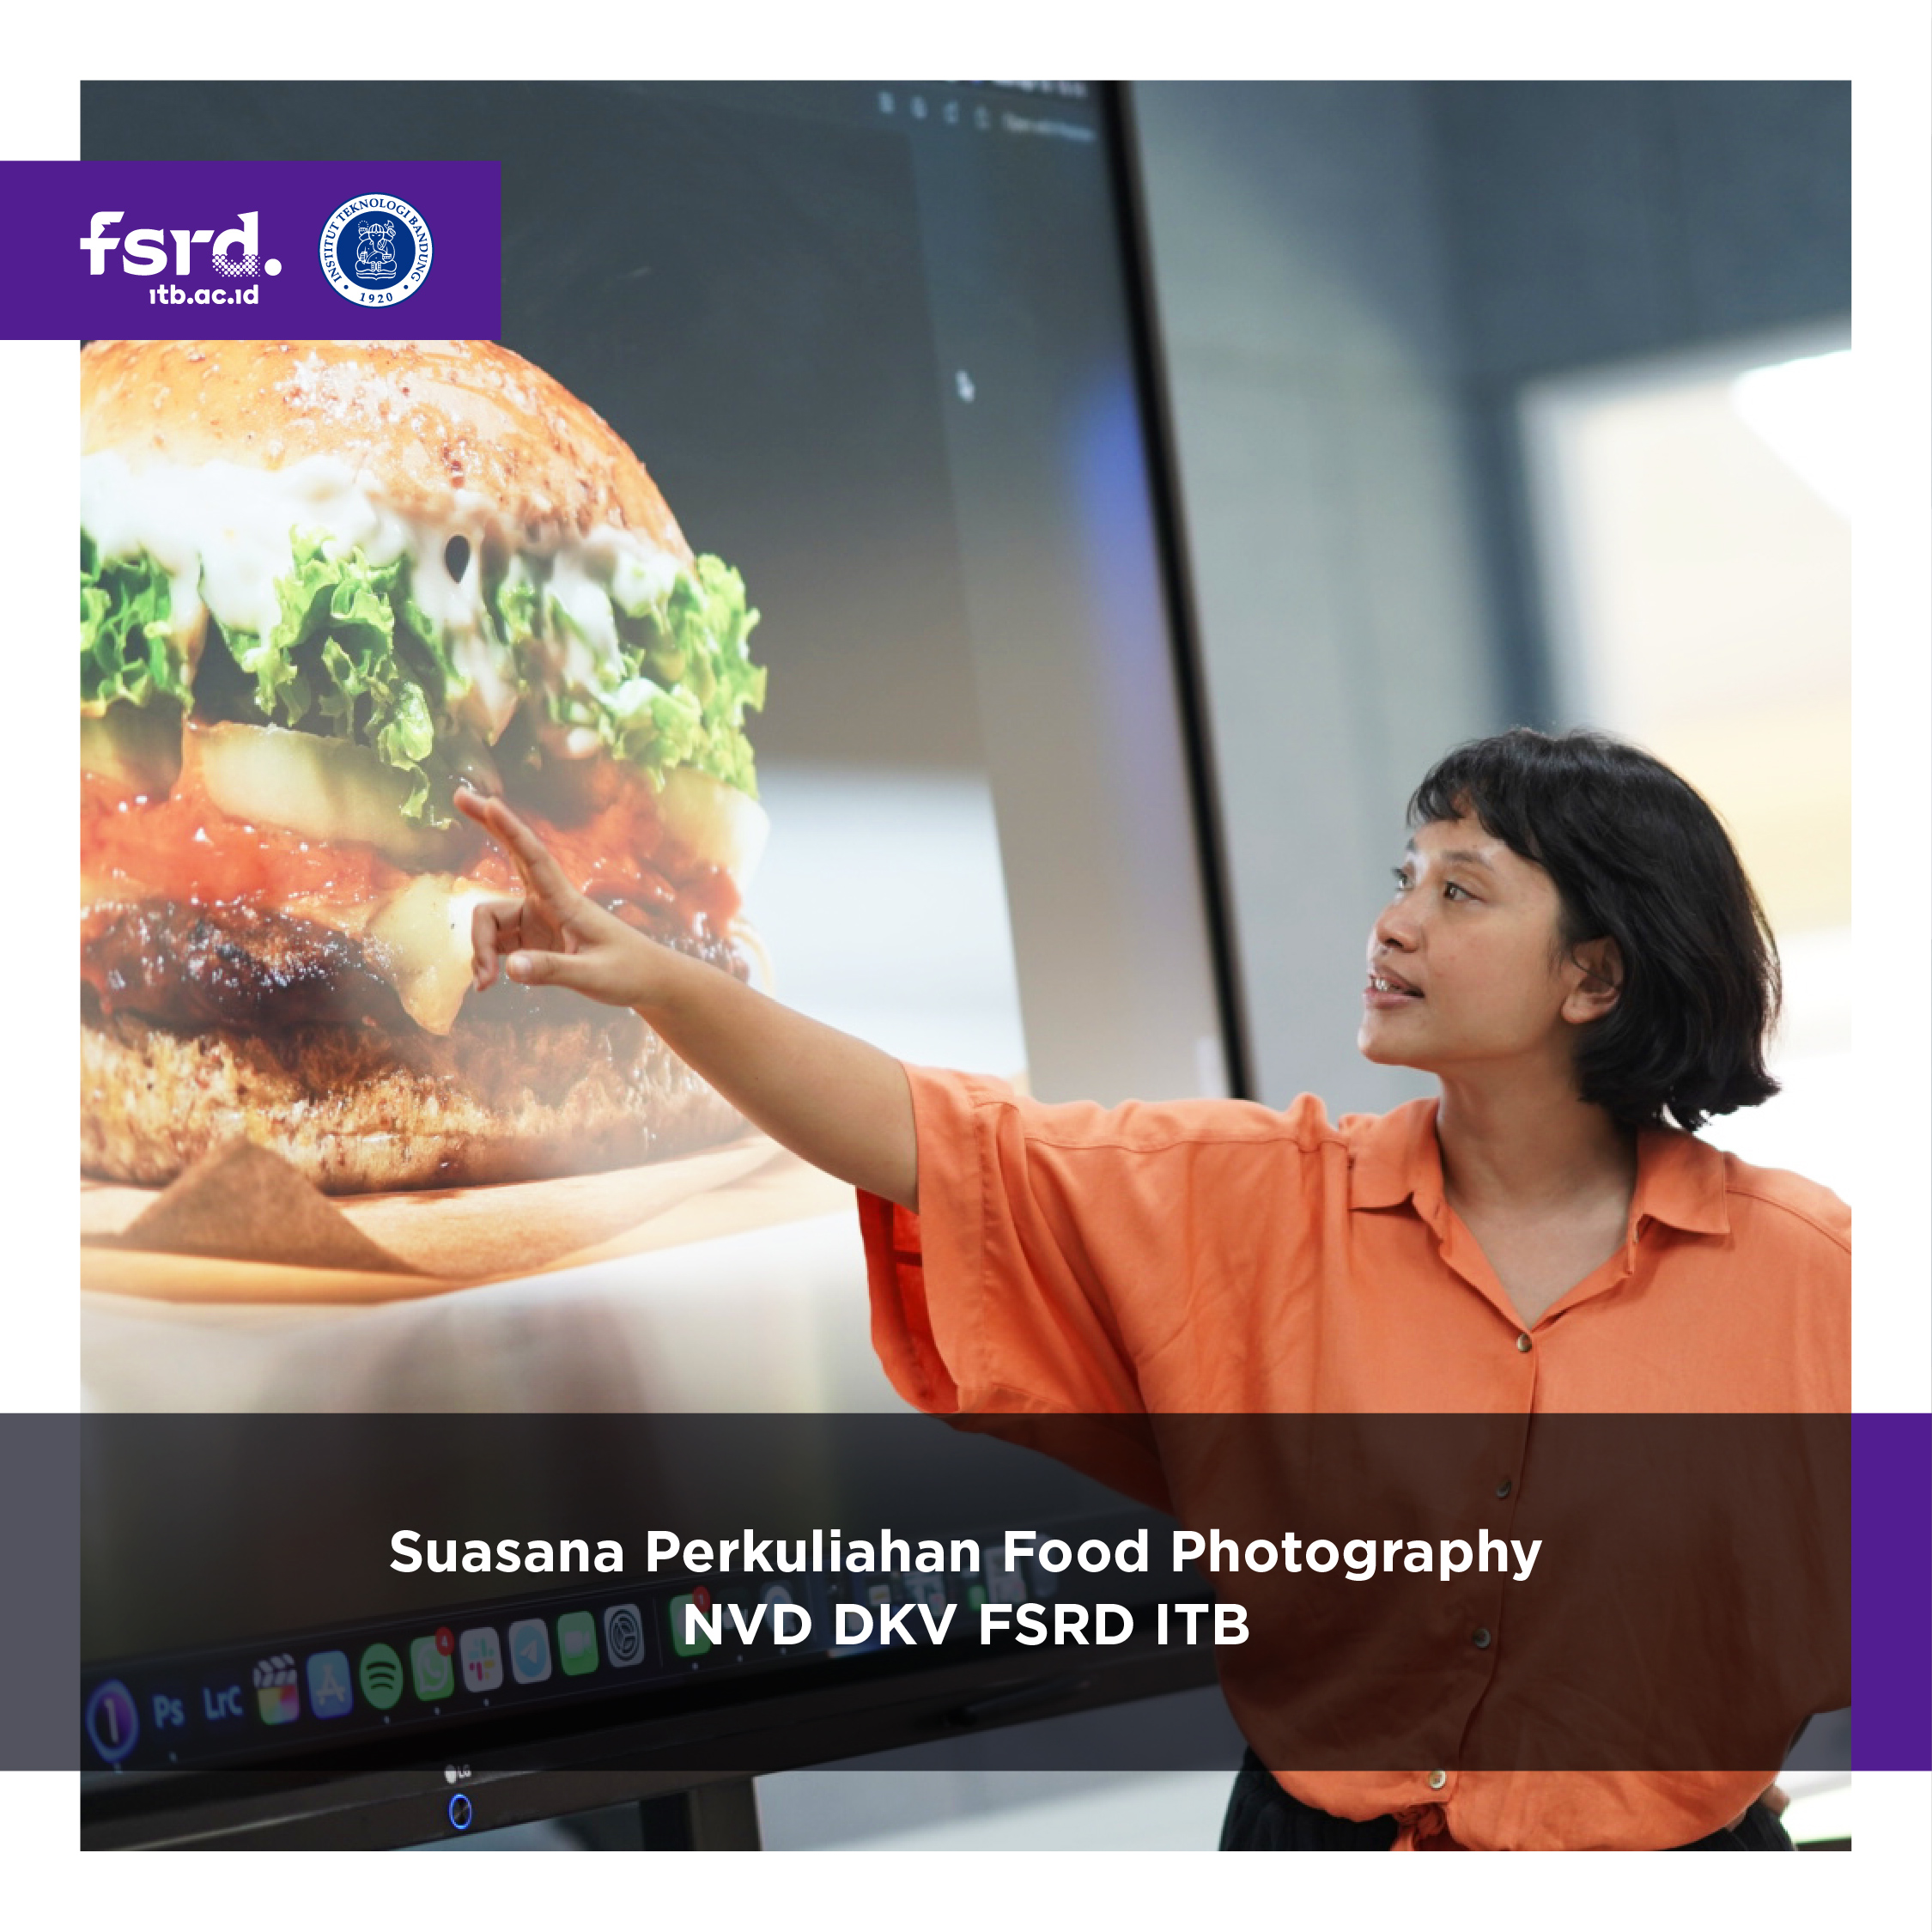 Applied Photography “Food Photography” in Digital Visual Narration (NVD) Program